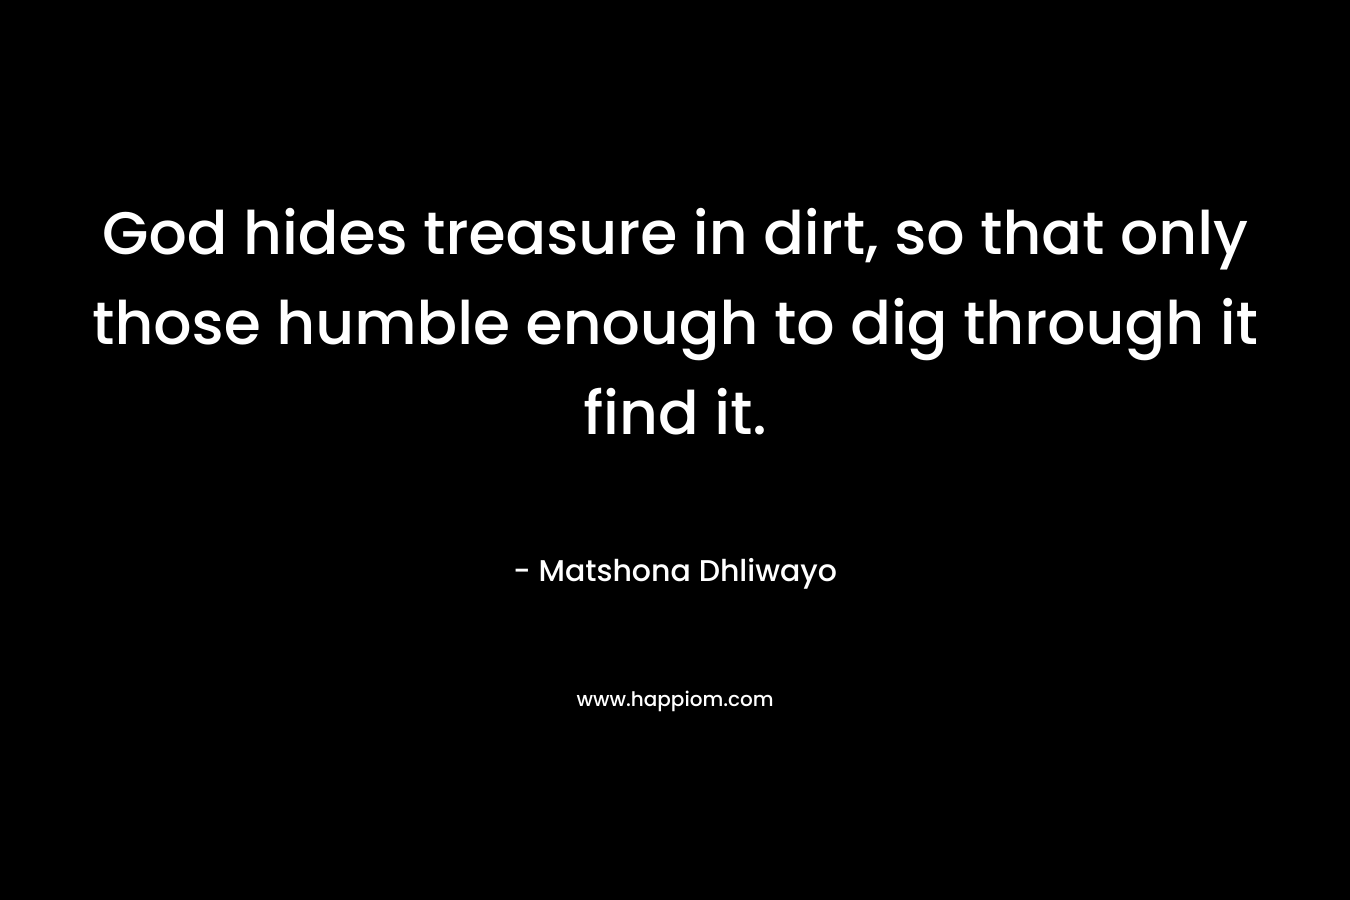 God hides treasure in dirt, so that only those humble enough to dig through it find it. – Matshona Dhliwayo